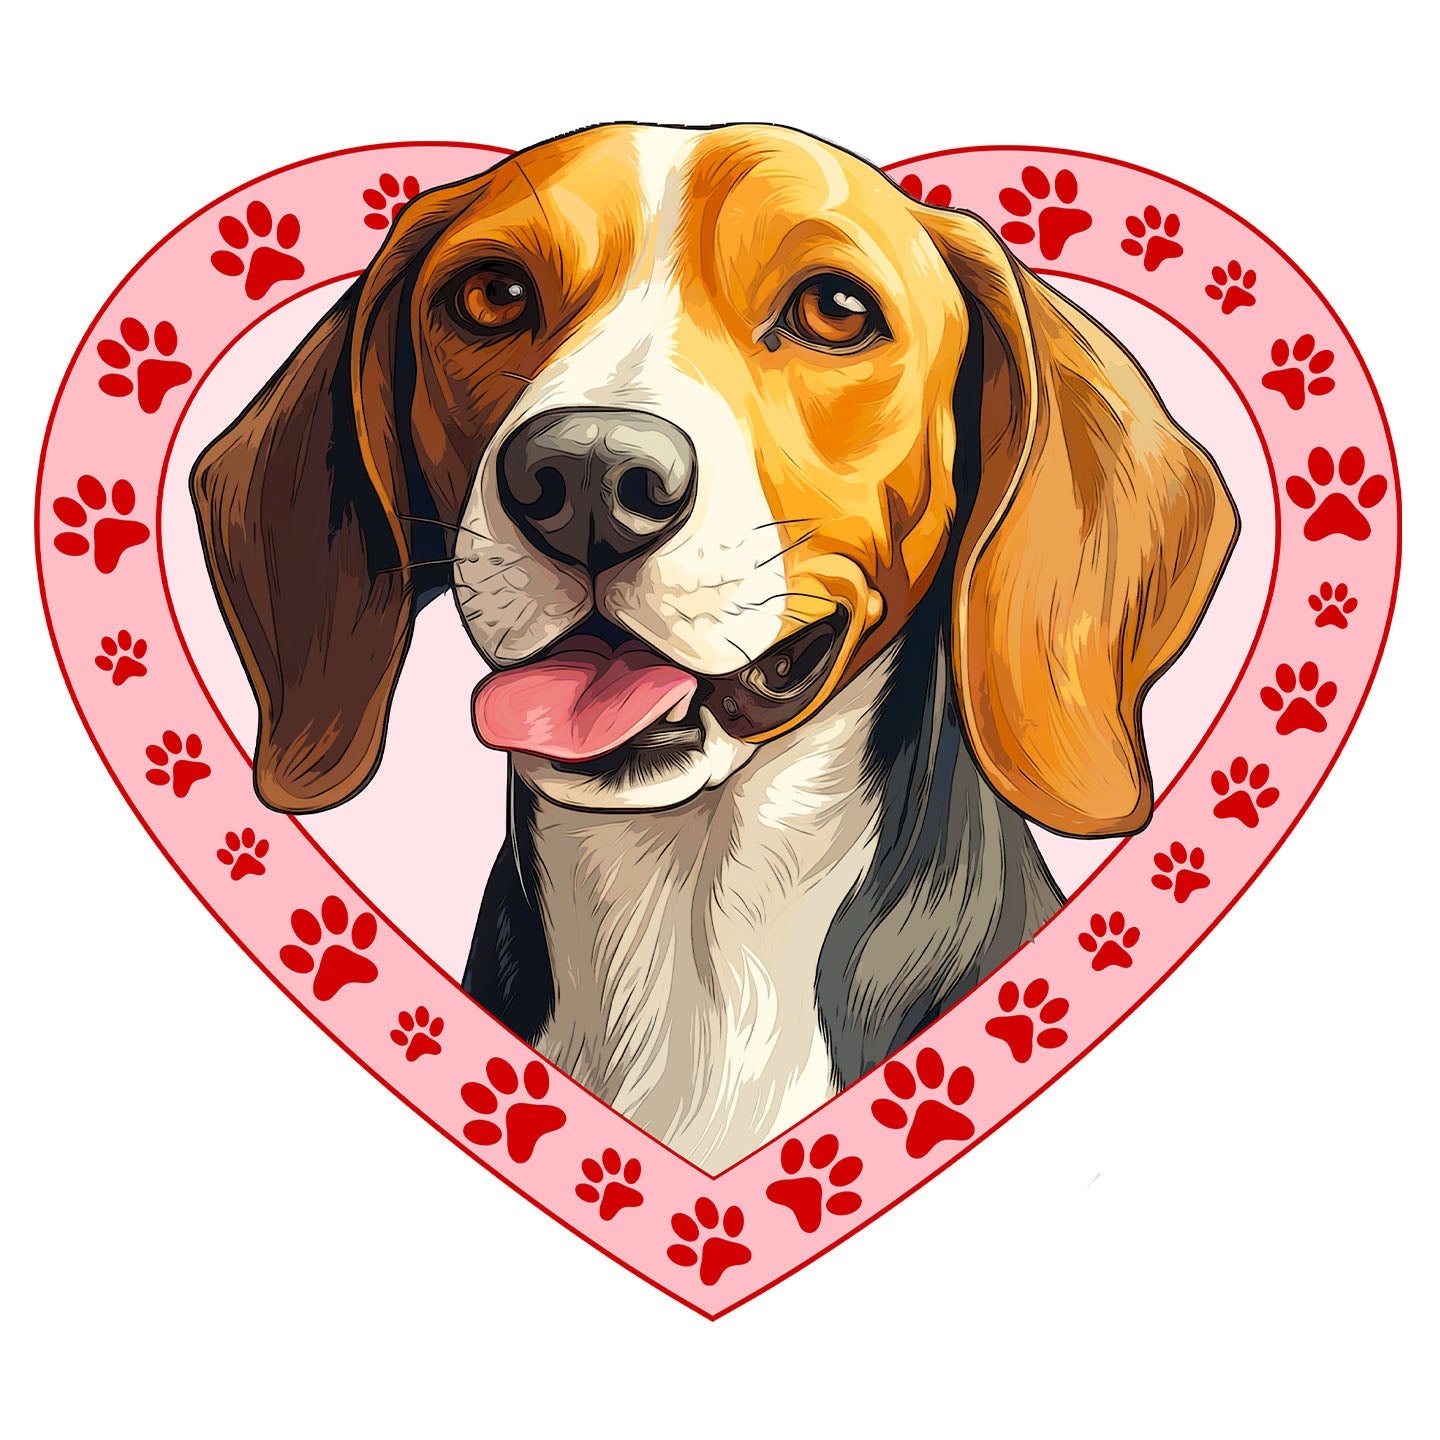 American Foxhound Illustration In Heart - Adult Unisex T-Shirt